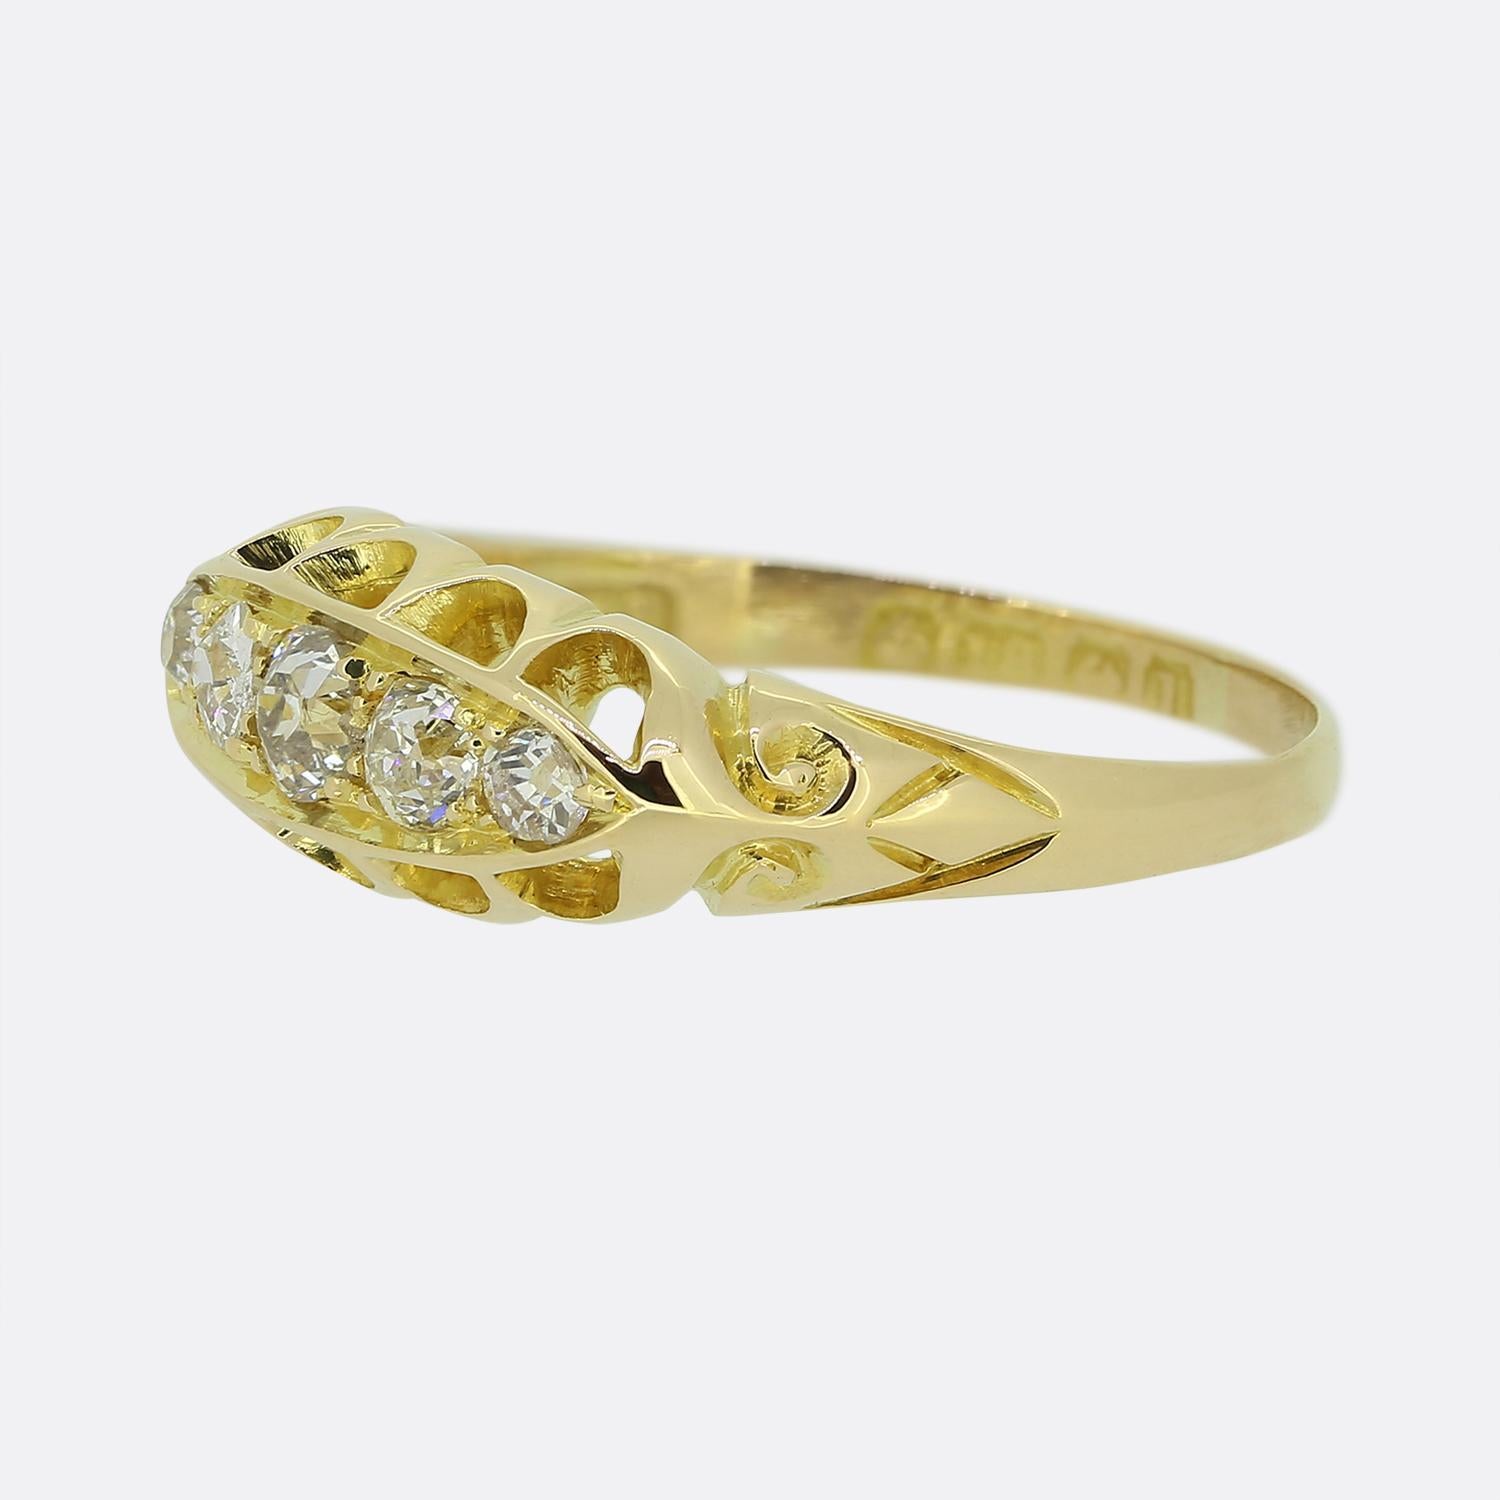 Here we have an lovely Edwardian five-stone diamond ring. This piece has been crafted from 18ct yellow gold and features five round faceted old cut diamonds which graduate in size towards the centre in a single line formation. The ring also